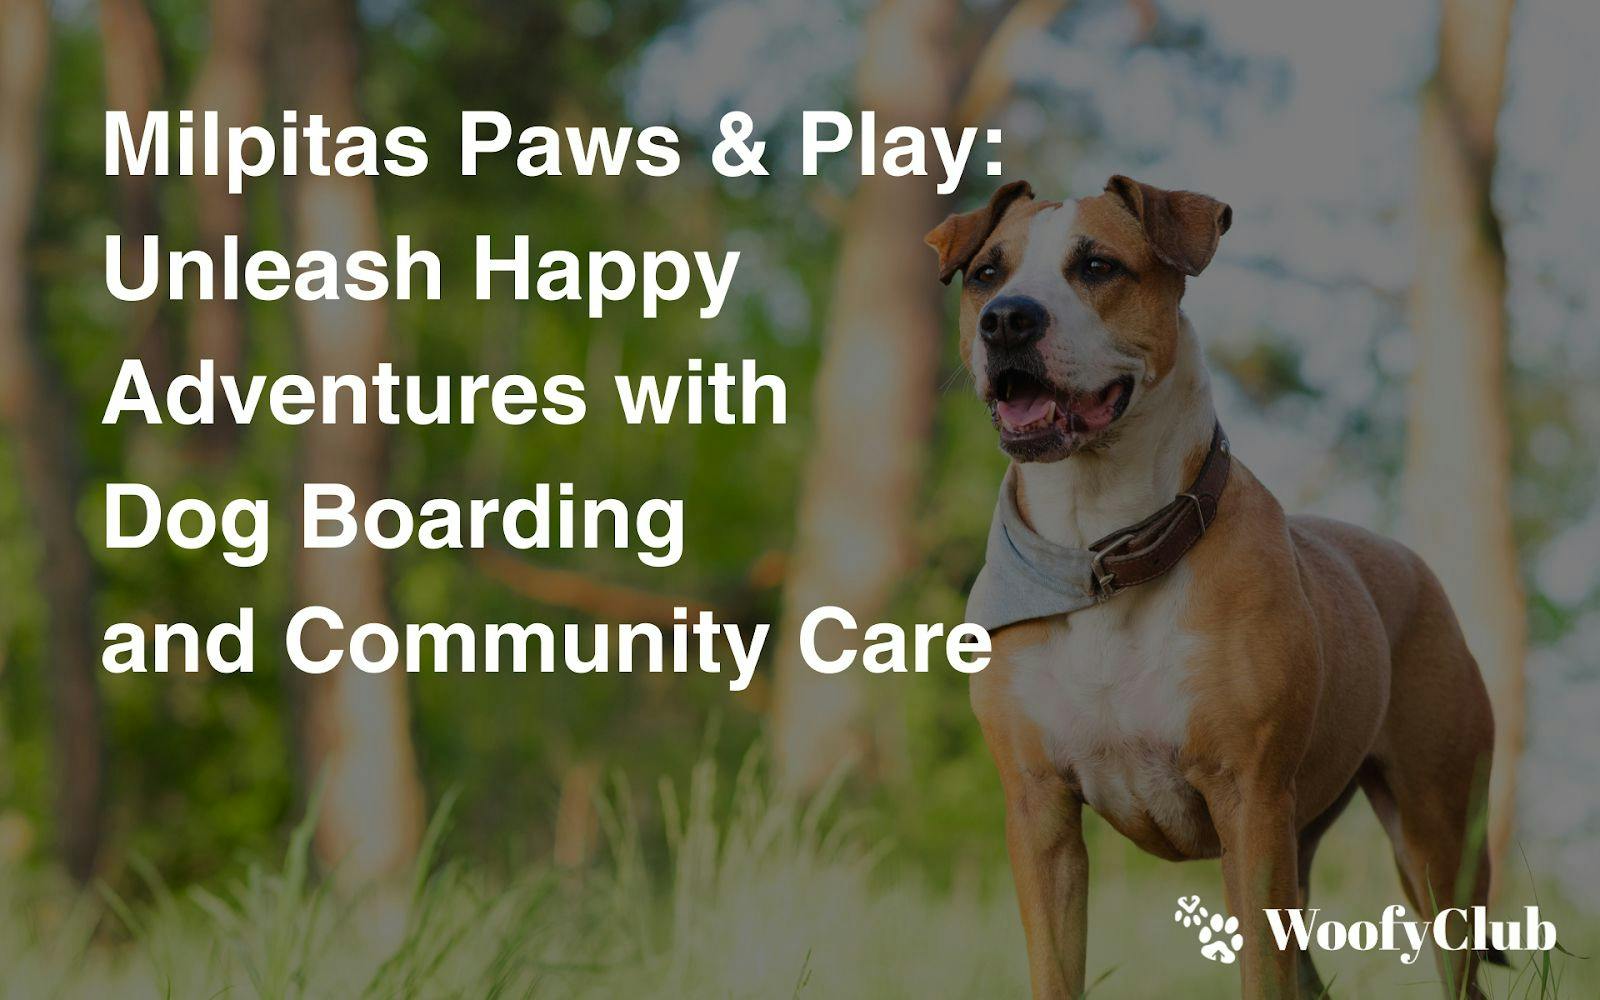 Milpitas Paws & Play: Unleash Happy Adventures With Dog Boarding And Community Care